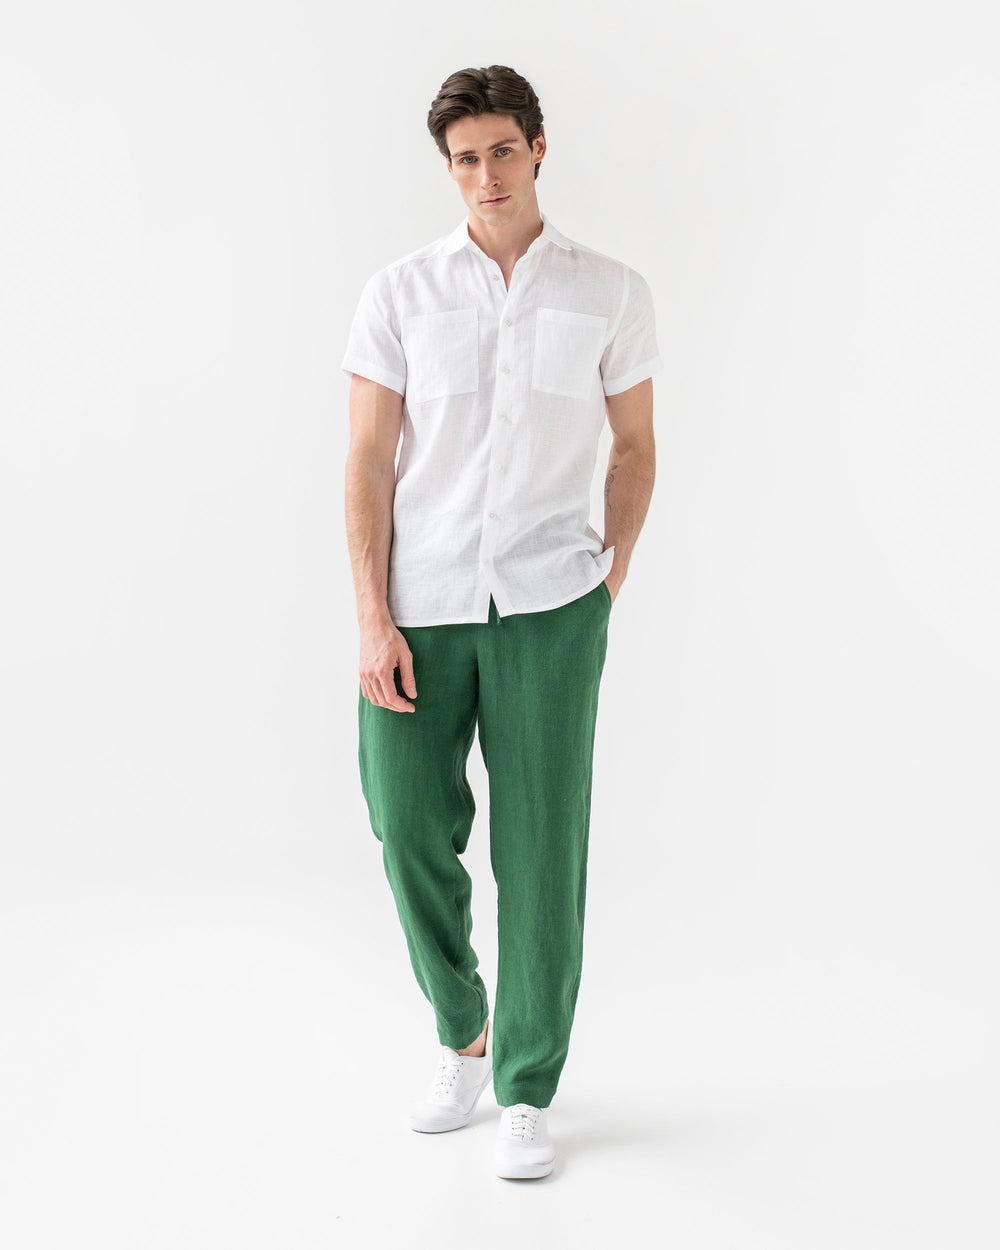 White Dress Shirt with Dark Green Dress Pants Outfits For Men (109 ideas &  outfits)